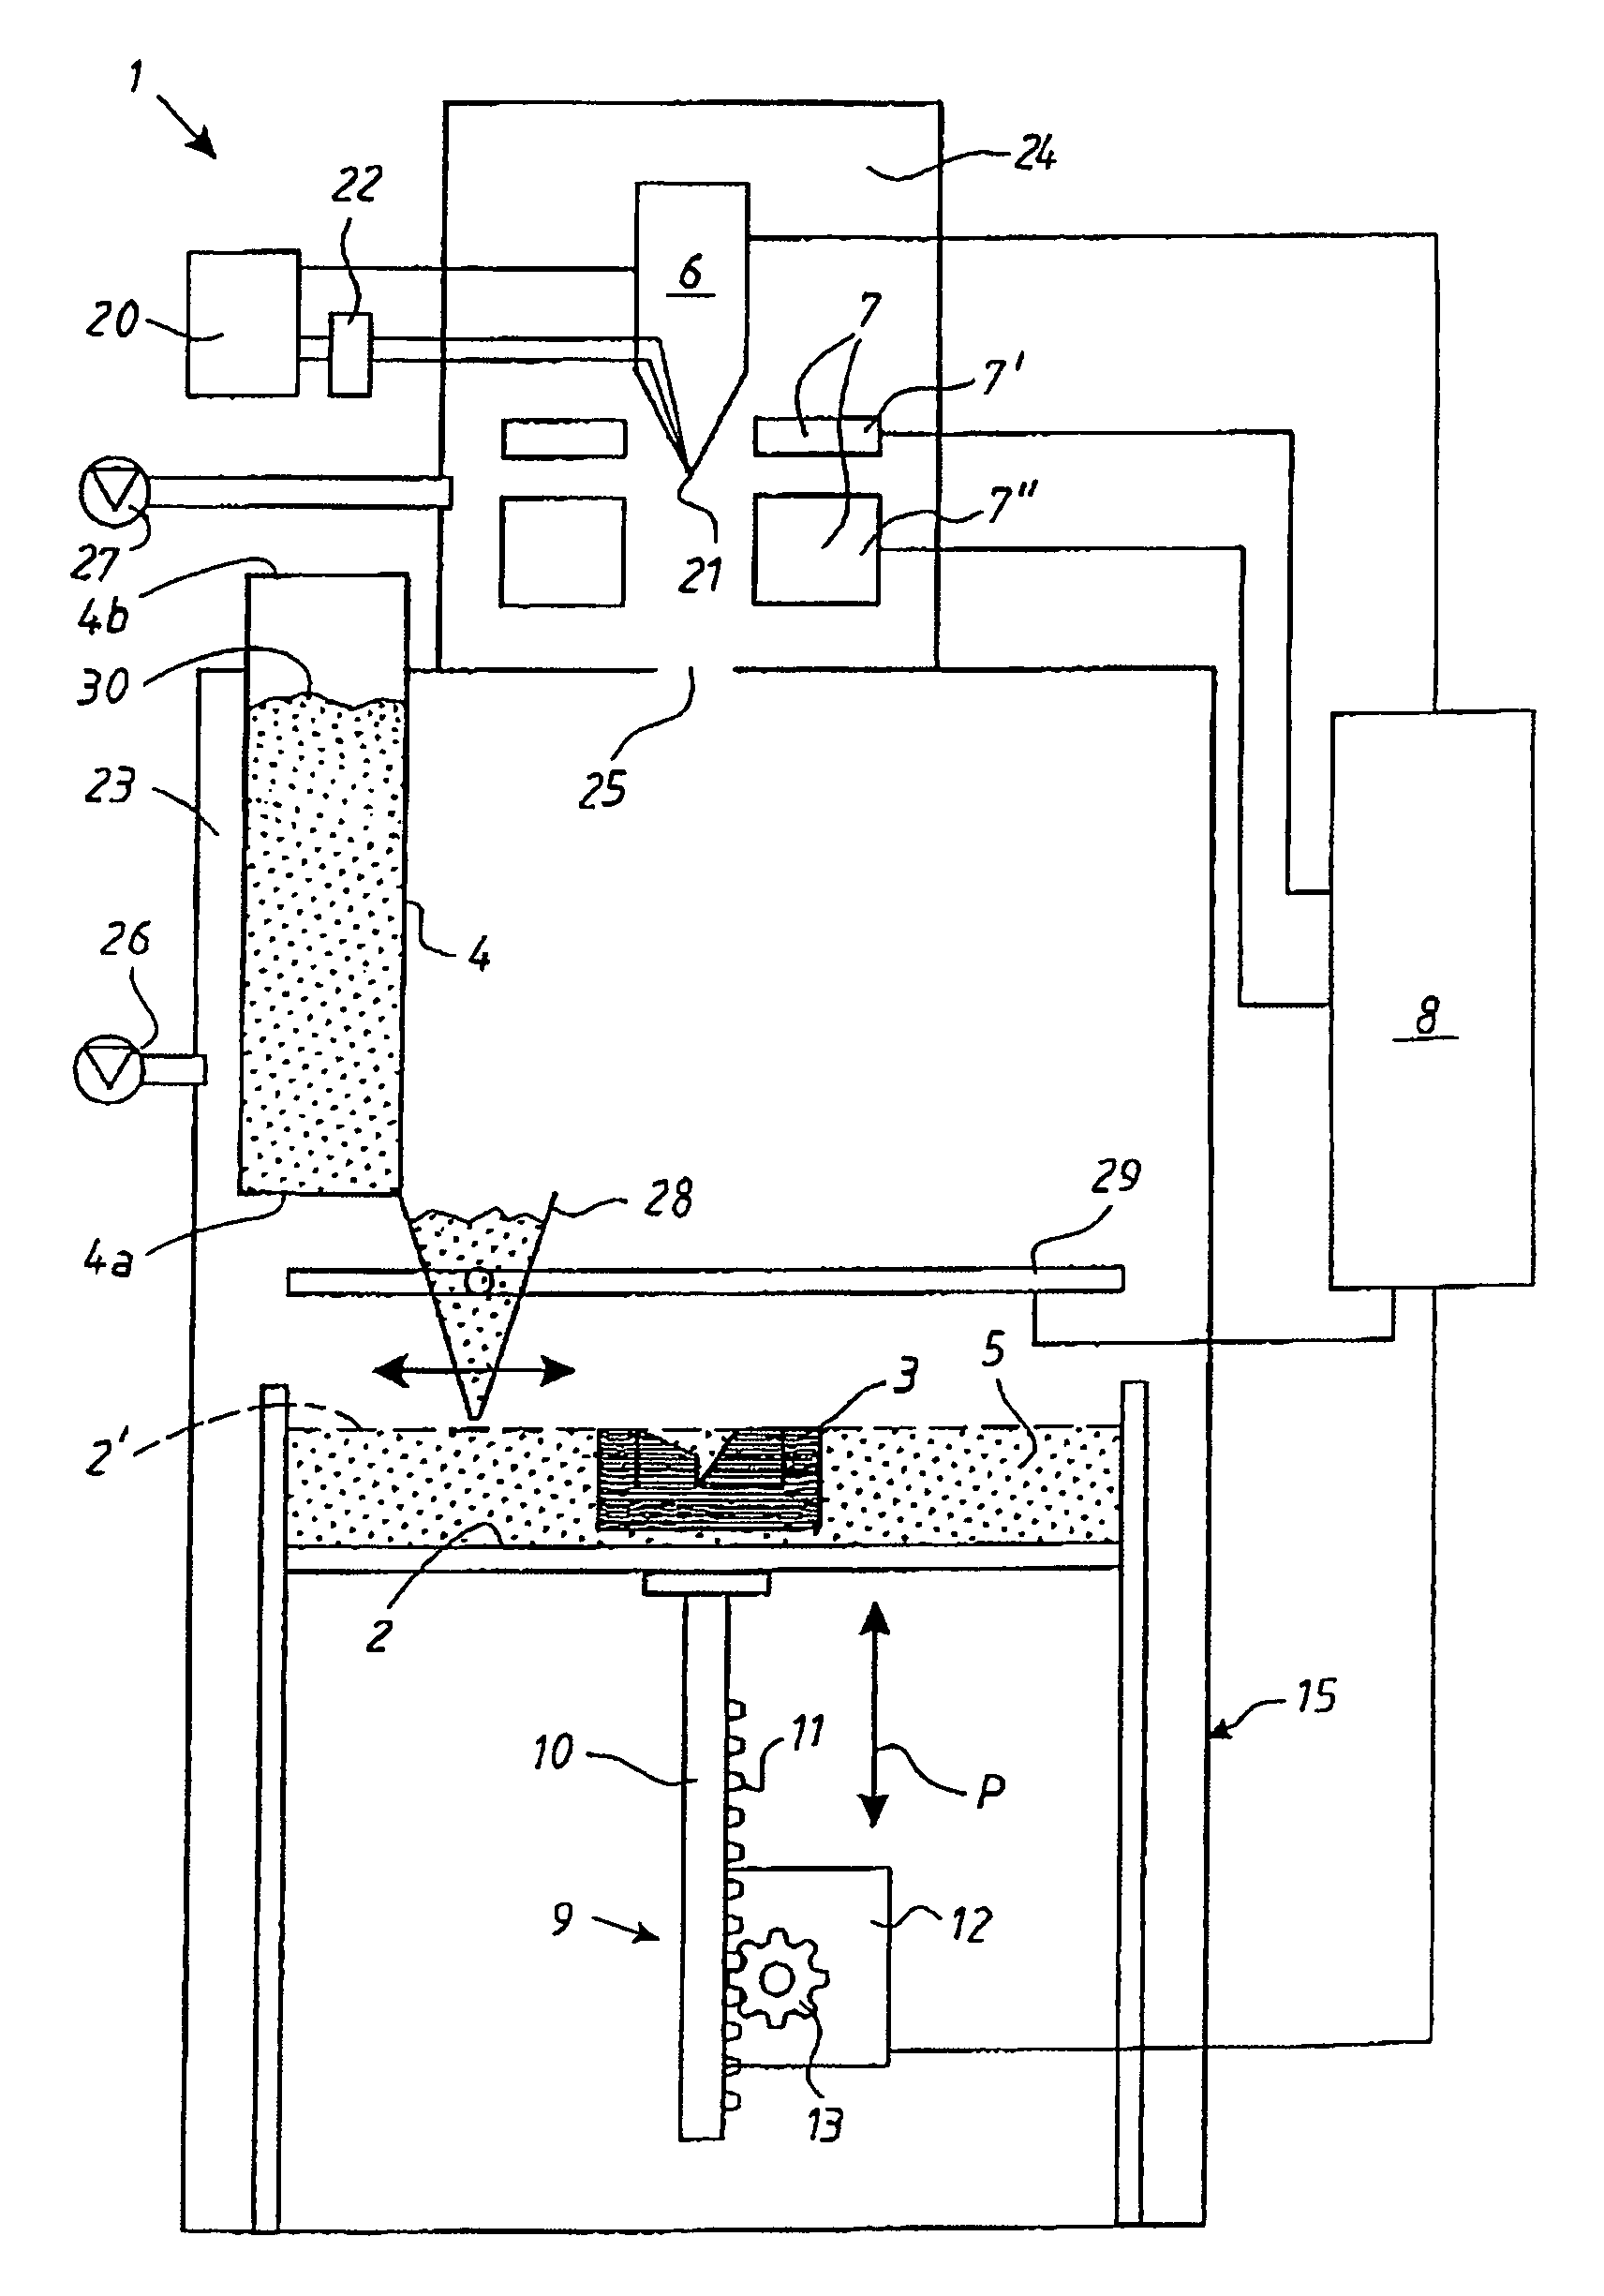 Arrangement for the production of a three-dimensional product